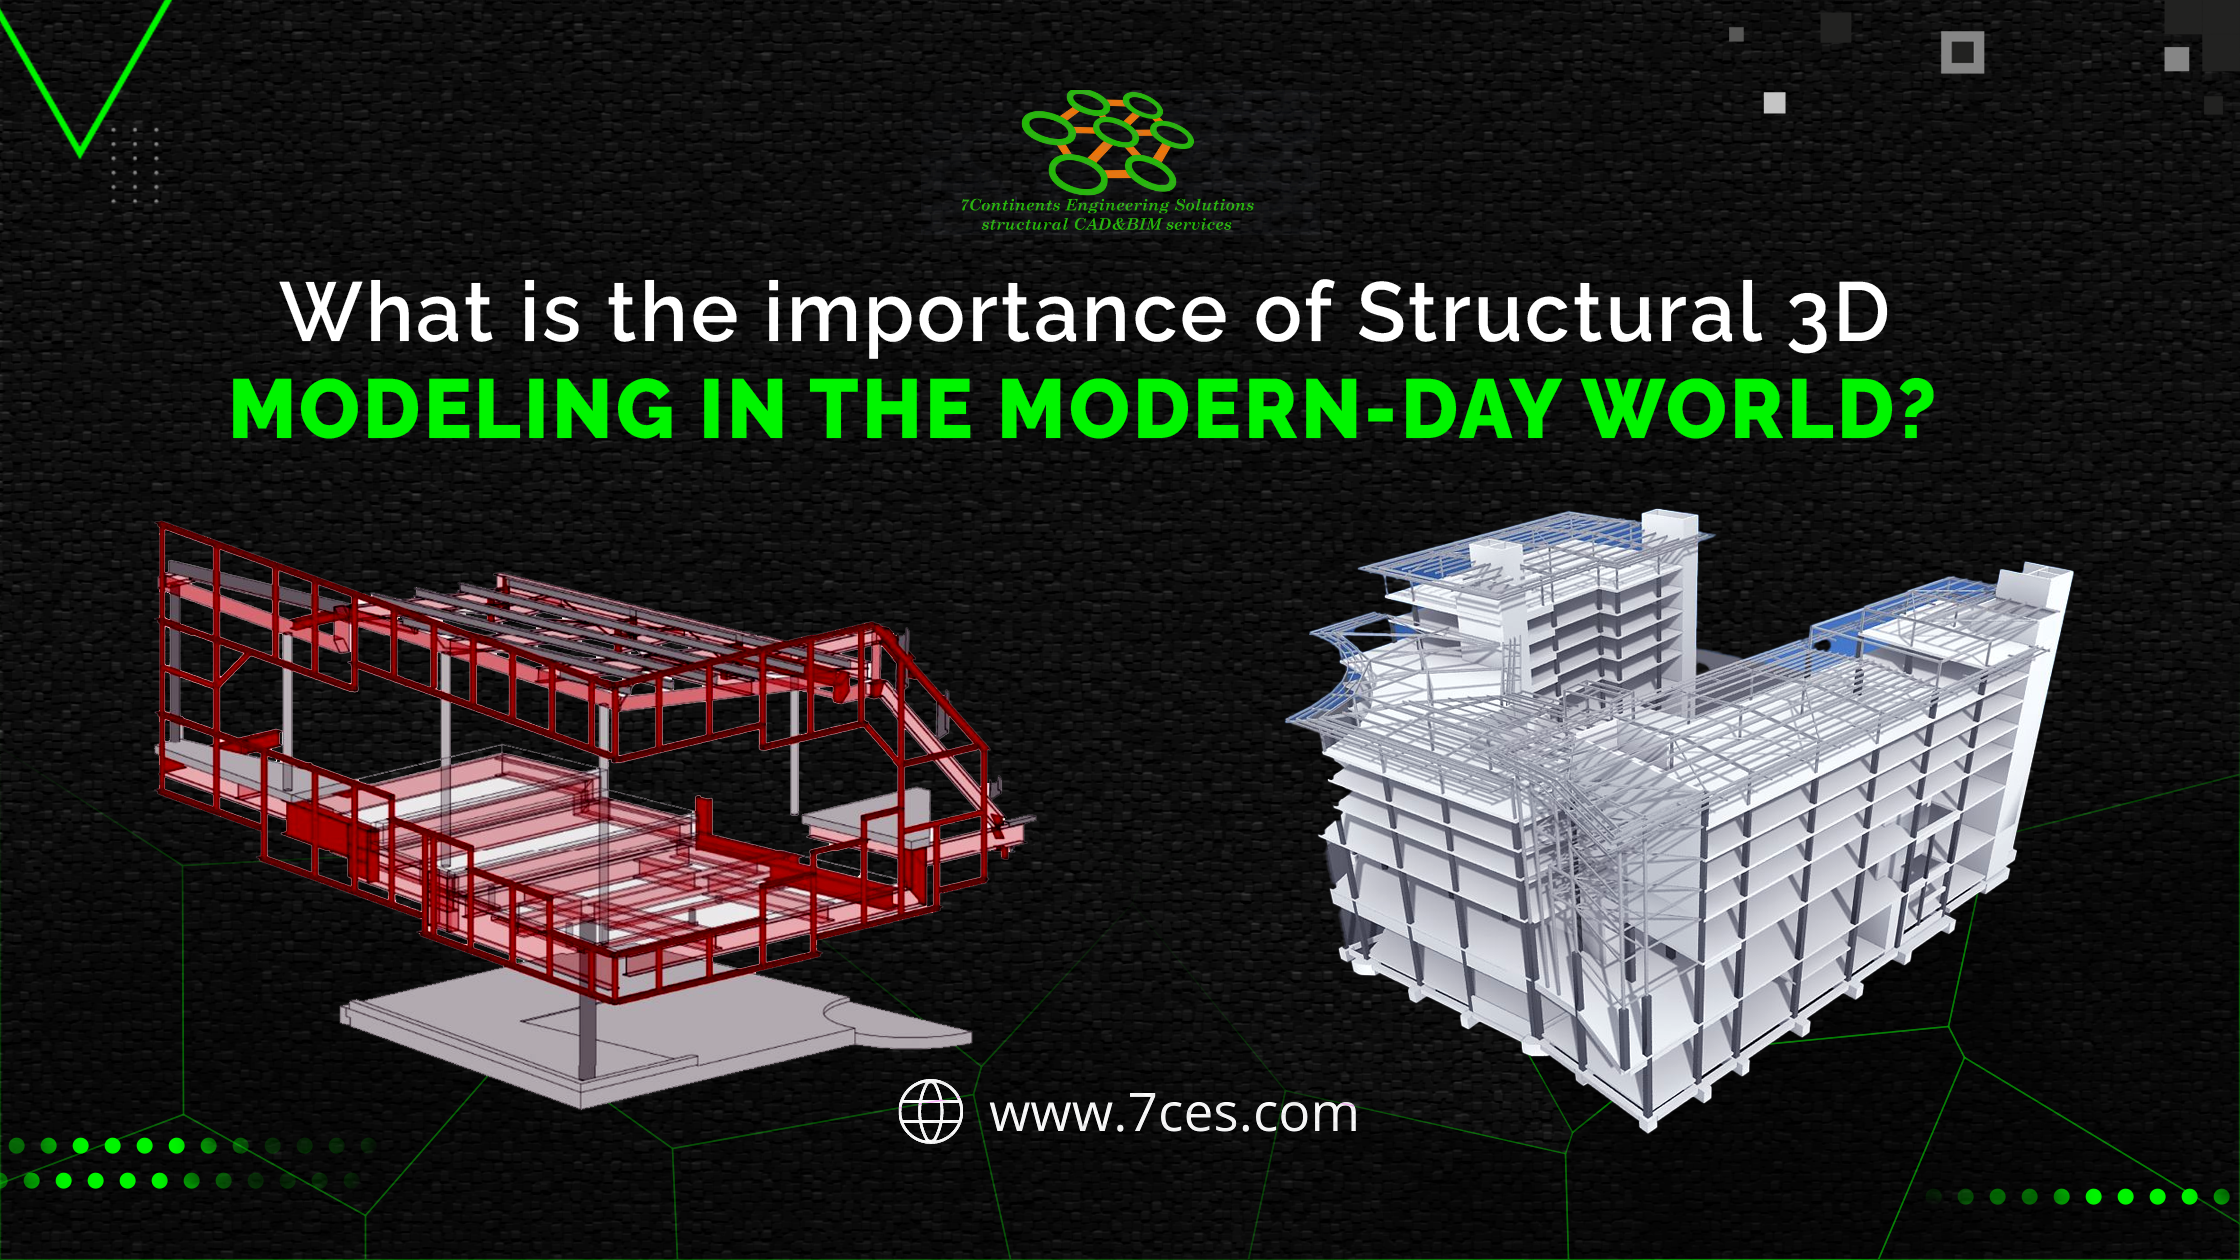 What is the importance of Structural 3D Modeling in the modern-day world? | 7CES